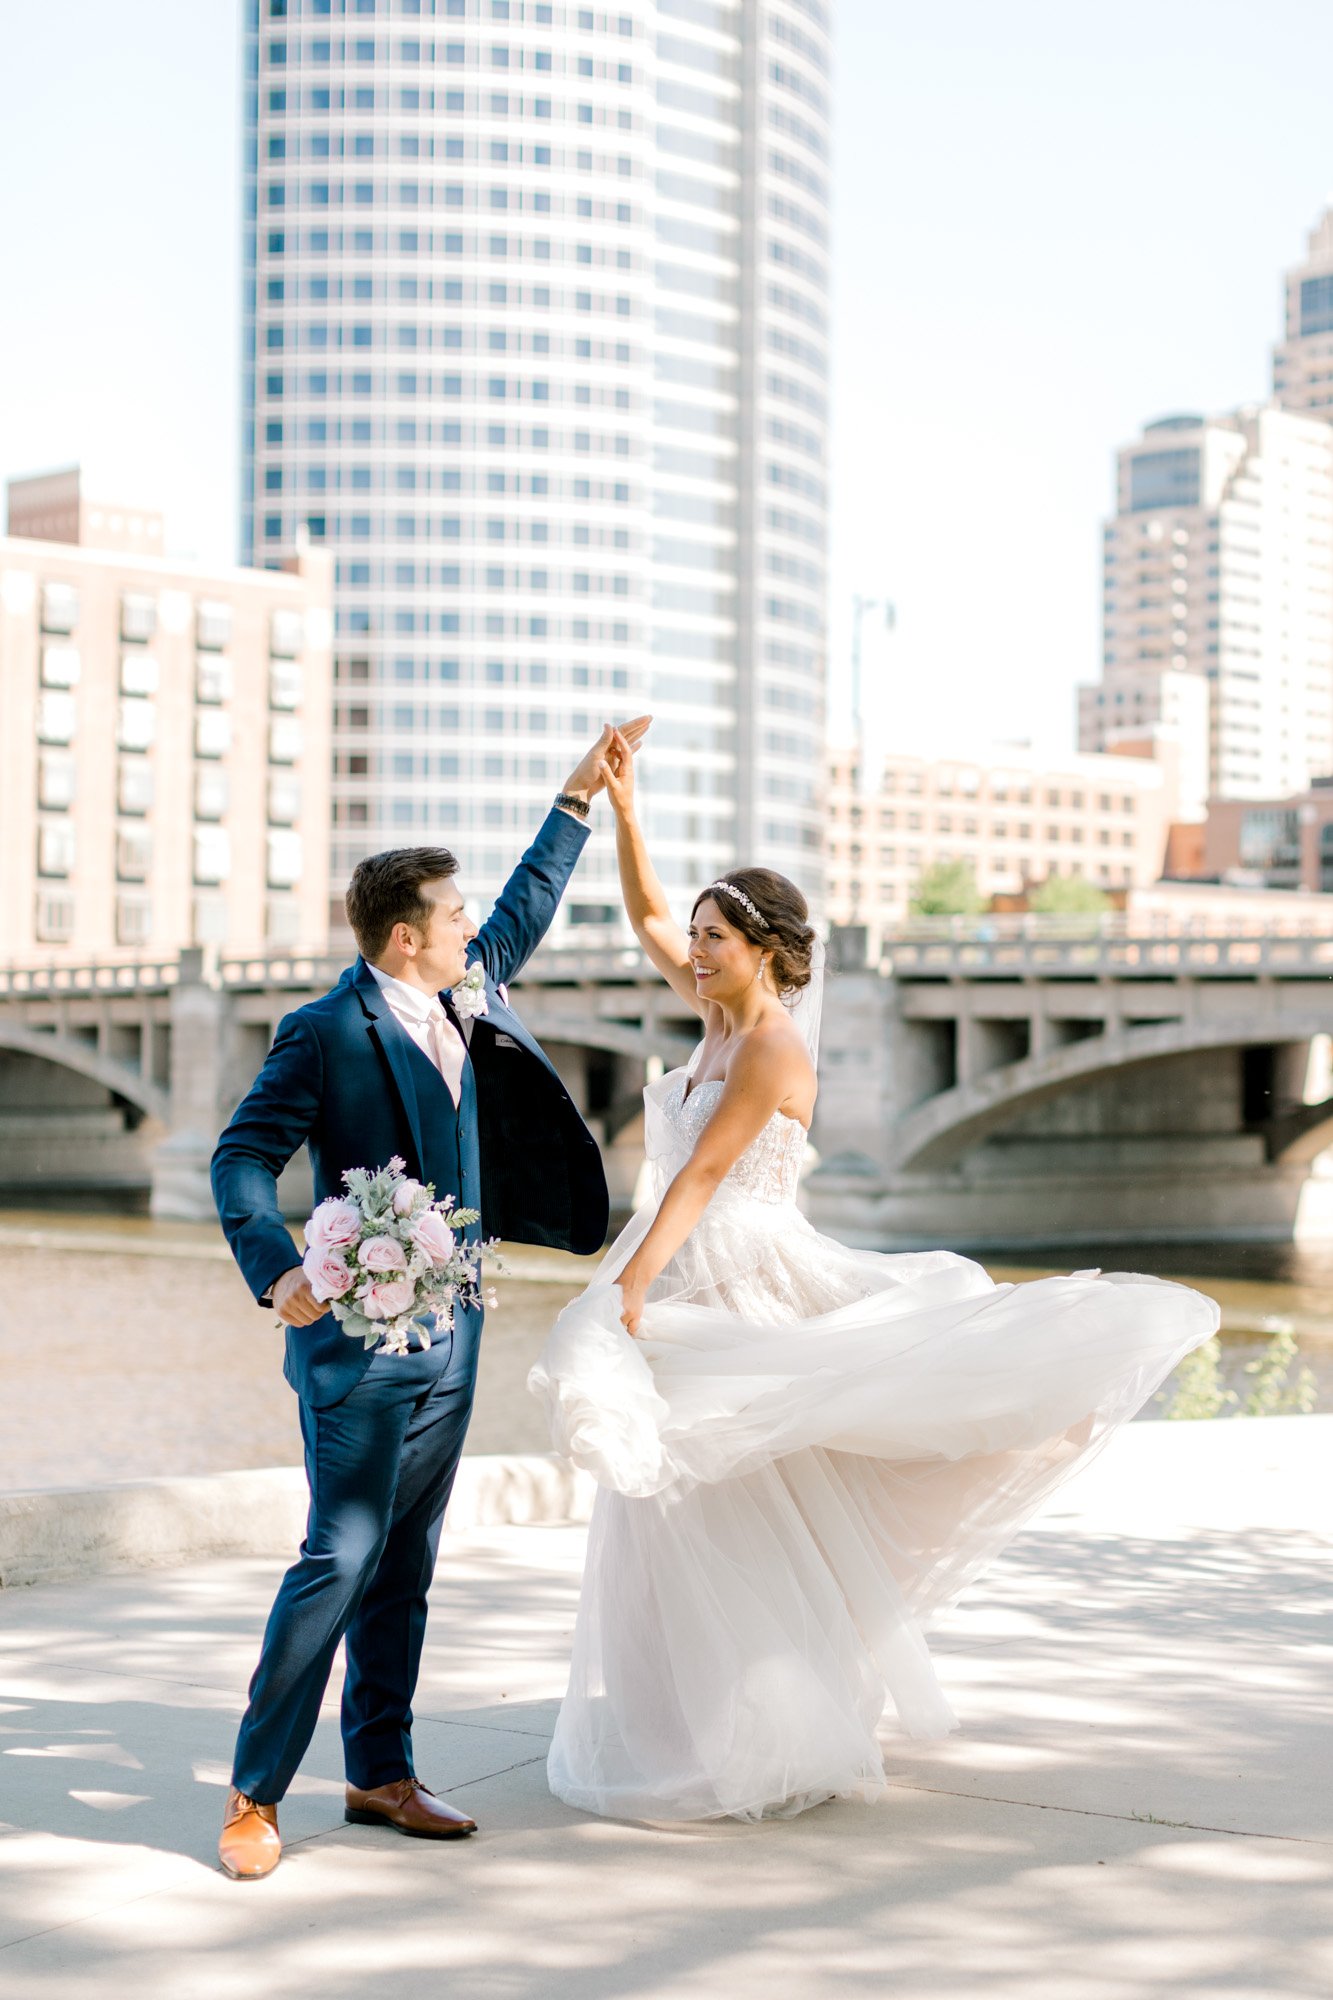 Clearwater Place Events Grand Rapids Wedding | Light &amp; Airy West Michigan Wedding Photography | Fine Art Weddings | Romantic &amp; Timeless